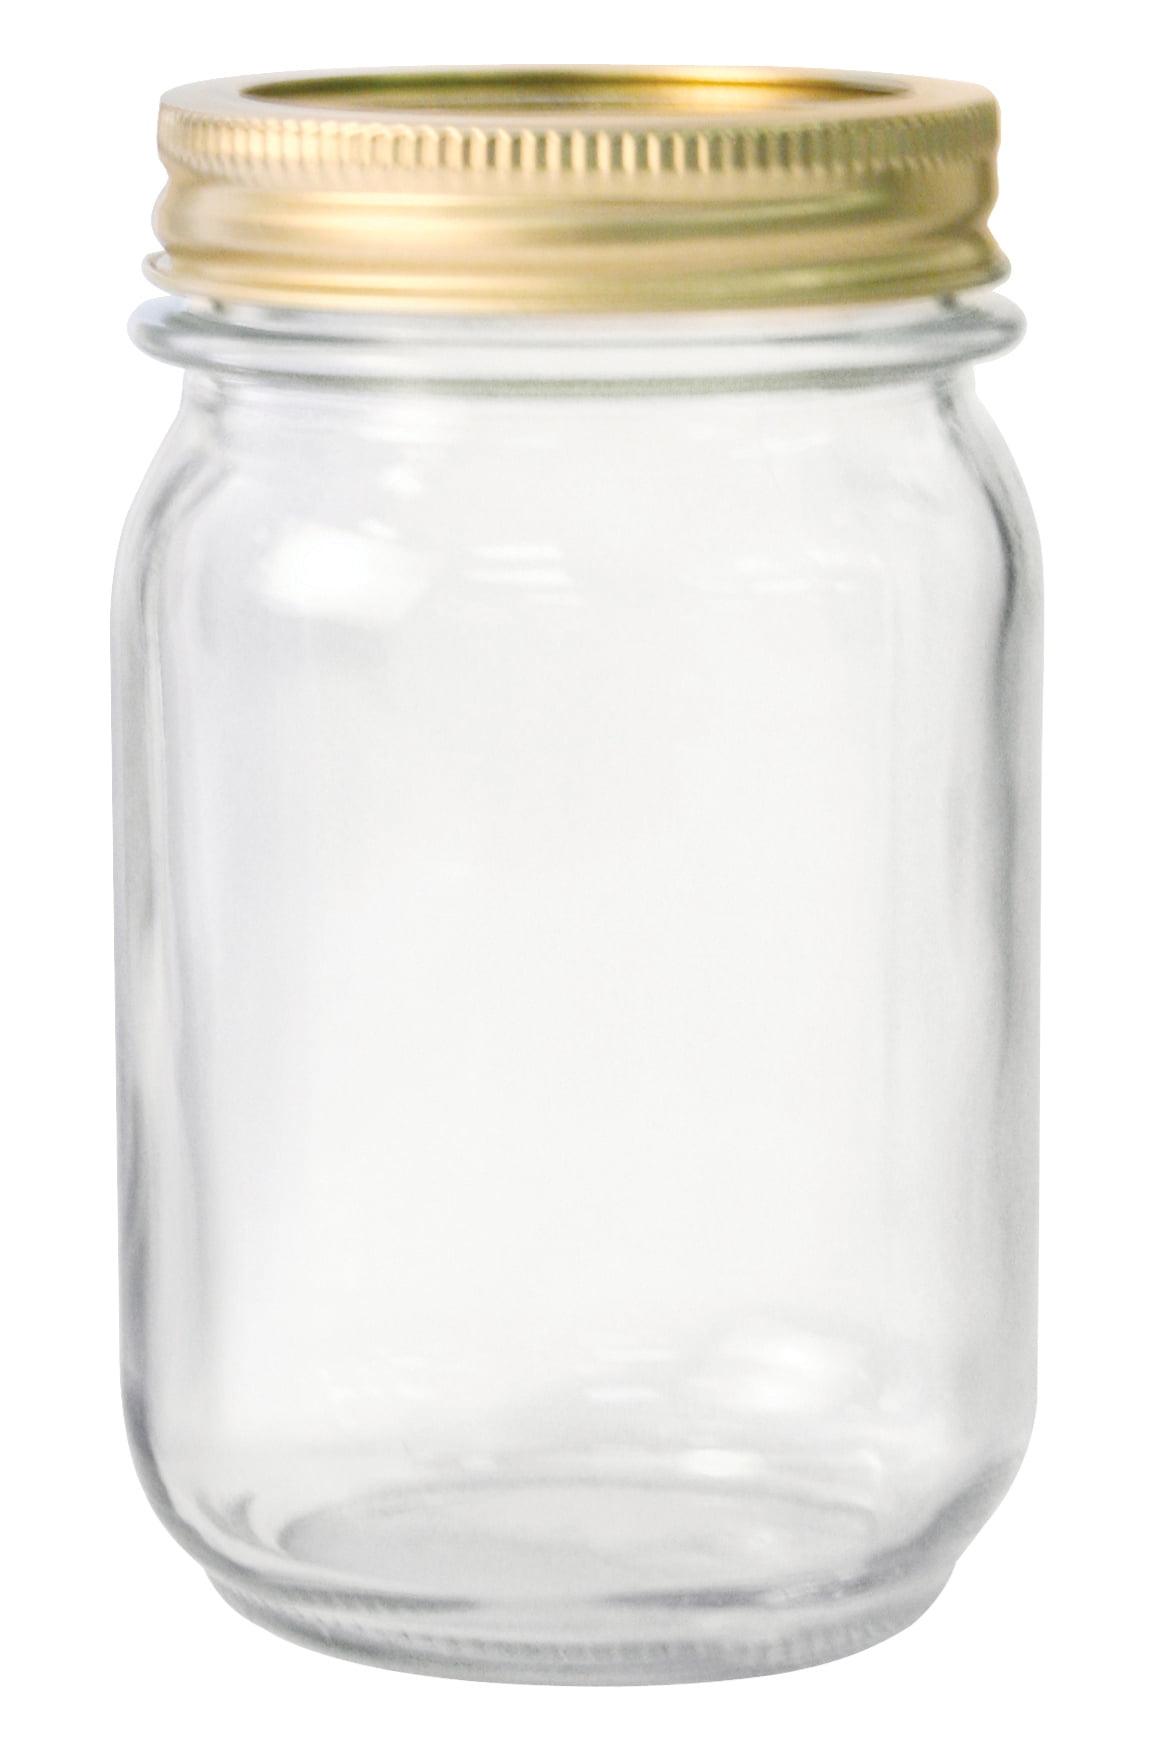 NMS 8 Ounce Glass Tall Mason Canning Jars 58mm Mouth - Case of 12